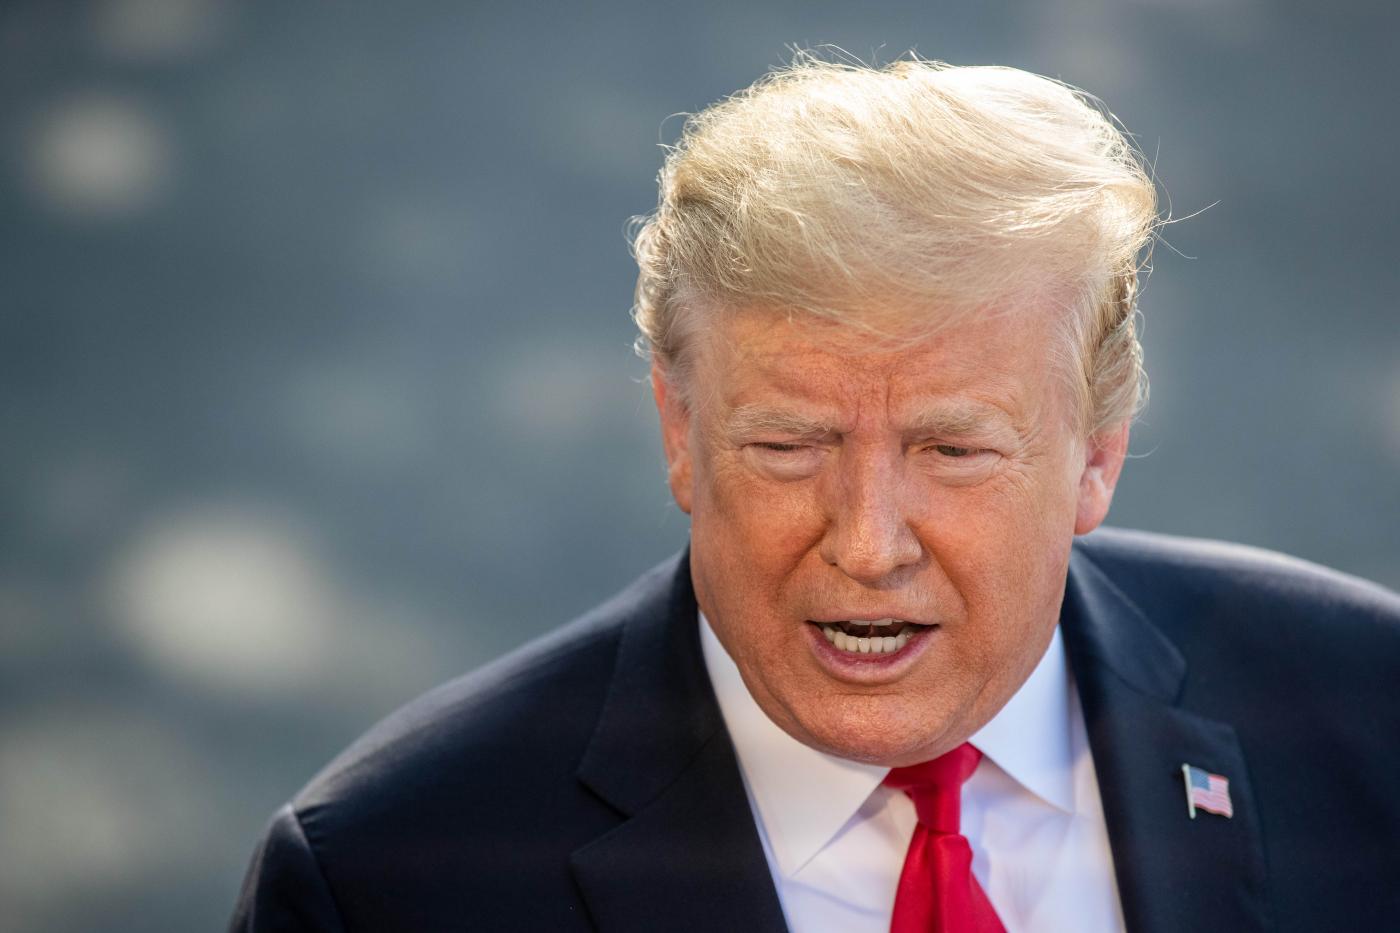 WASHINGTON D.C., May 30, 2019 (Xinhua) -- U.S. President Donald Trump speaks to reporters before leaving the White House in Washington D.C., the United States, on May 30, 2019. Donald Trump slammed Special Counsel Robert Mueller as "highly conflicted" on Thursday, one day after Mueller's first-ever public statement saying that charging Trump with a crime was "not an option we could consider" due to Justice Department guidelines. (Xinhua/Ting Shen/IANS) by Ting Shen.